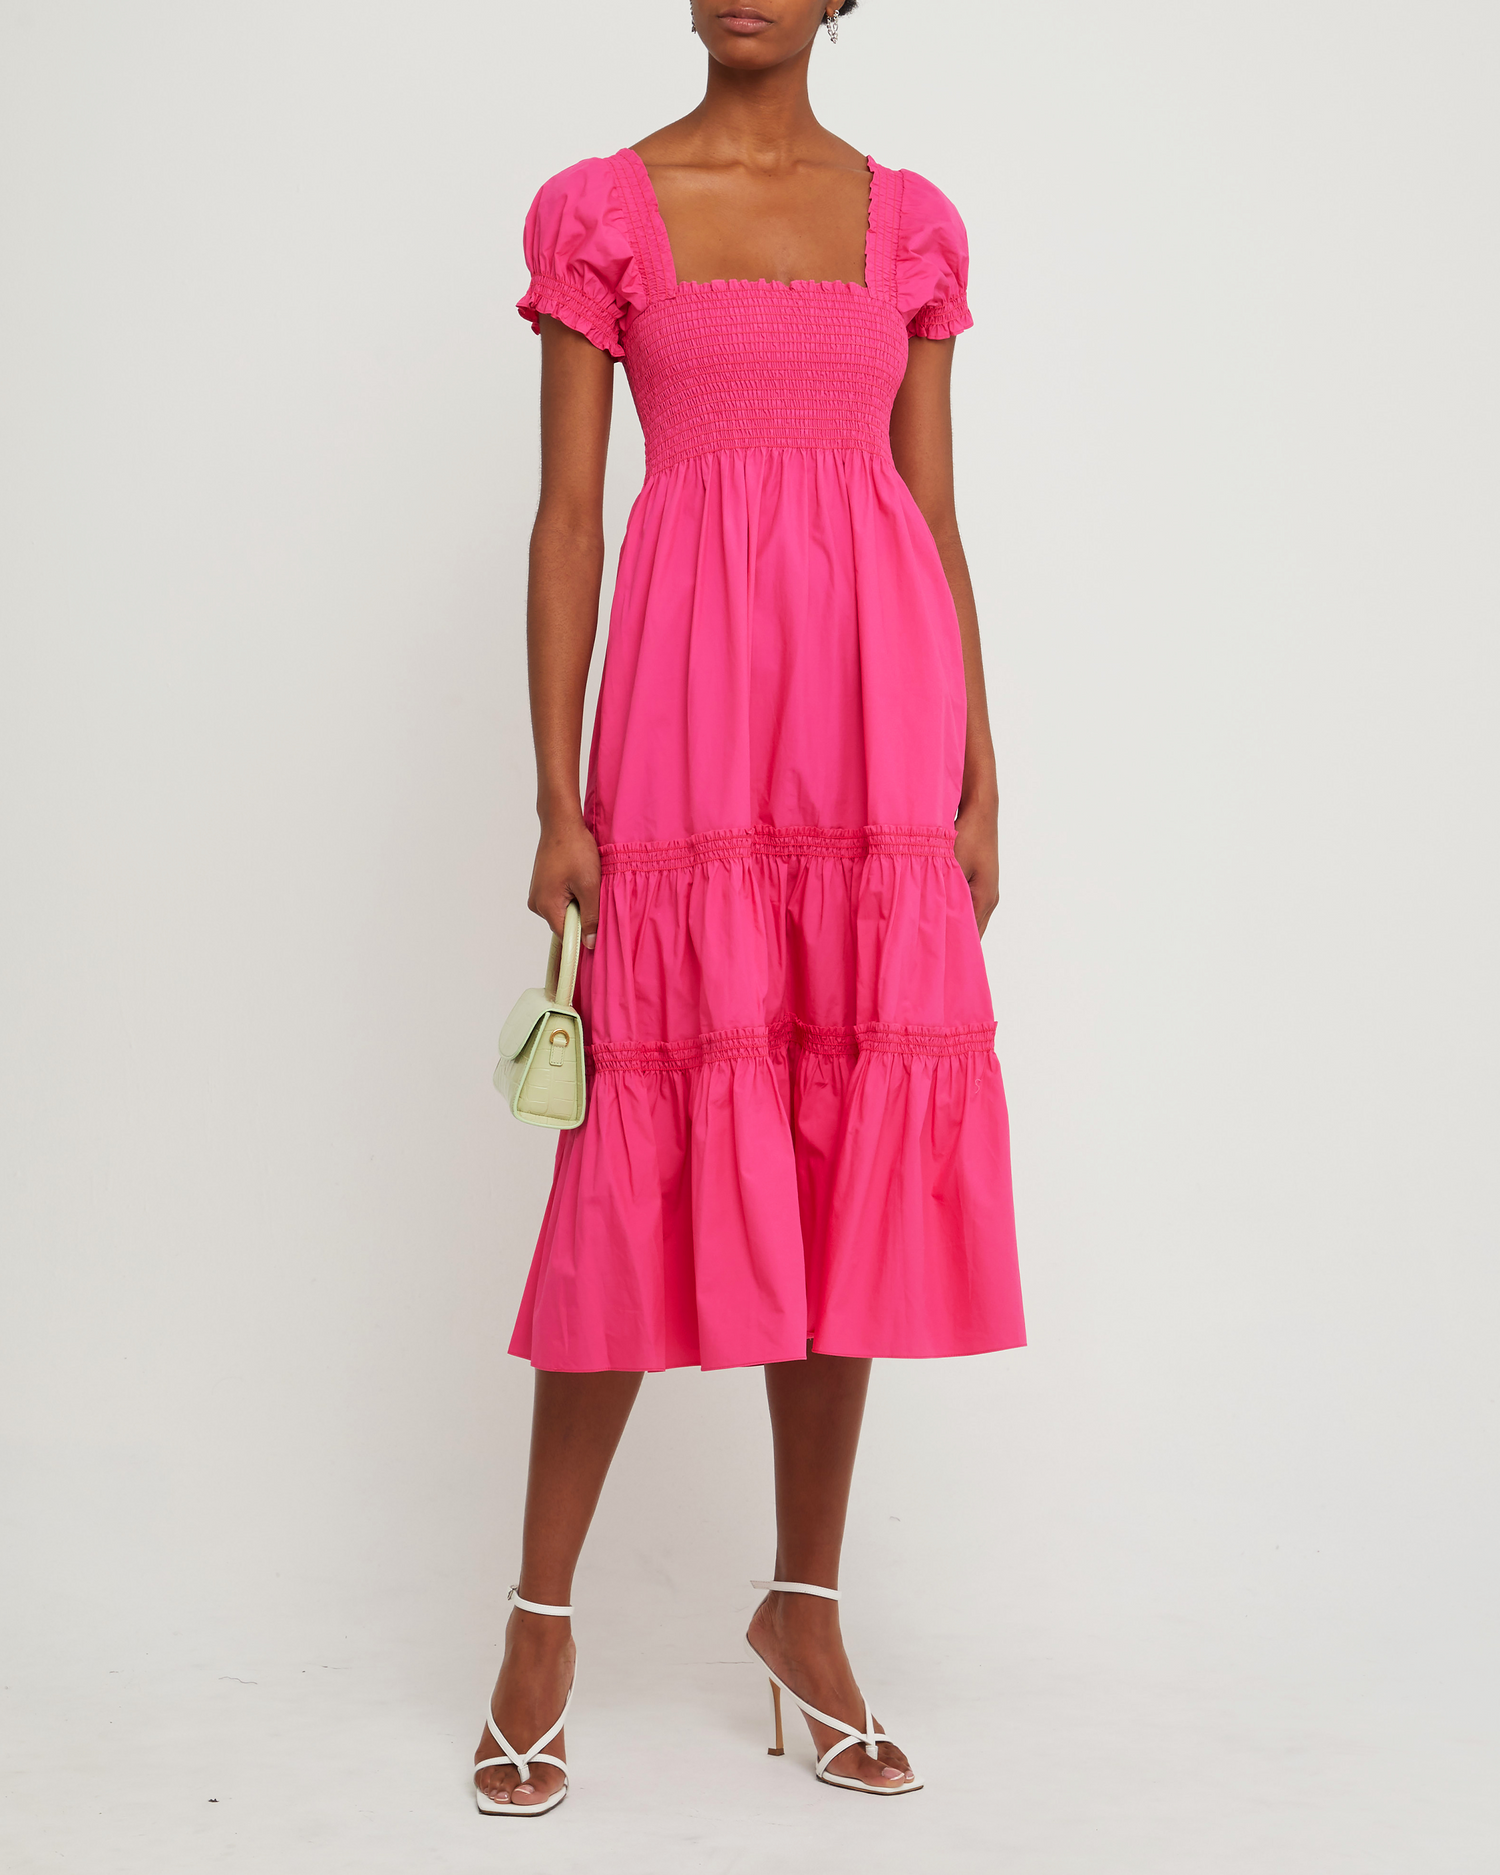 Fifth image of Square Neck Smocked Maxi Dress, a pink maxi dress, smocked, puff sleeves, short sleeves